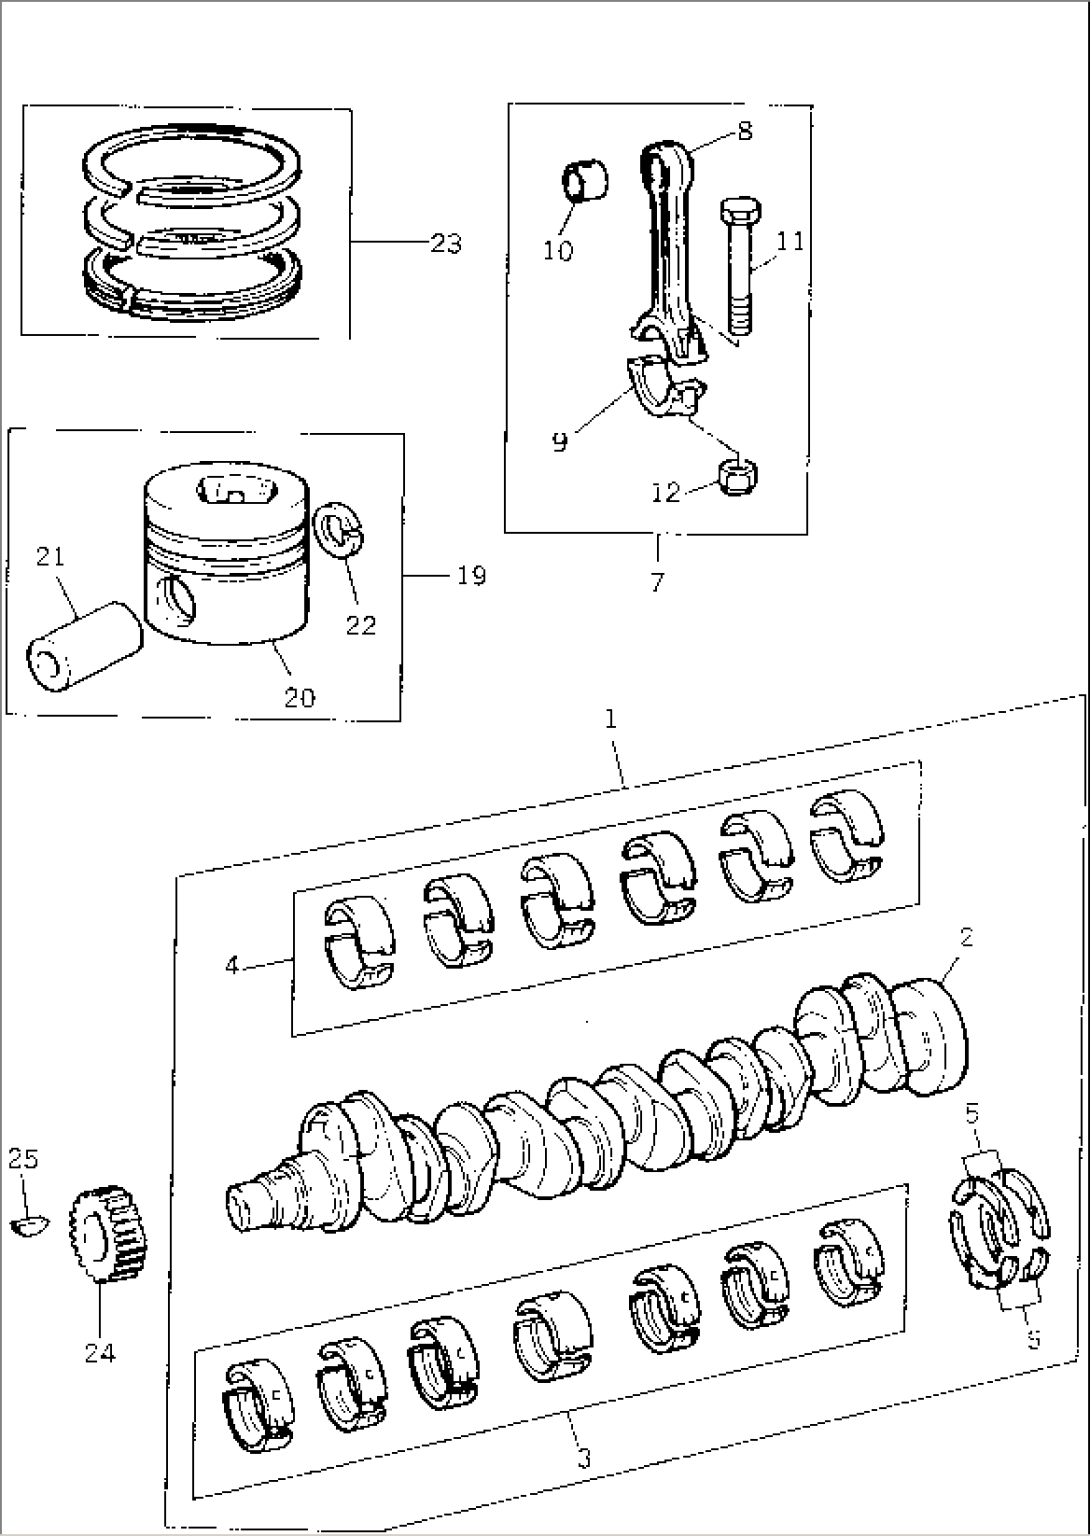 CRANKSHAFT¤ PISTONS AND CONNECTING RODS (1/2)